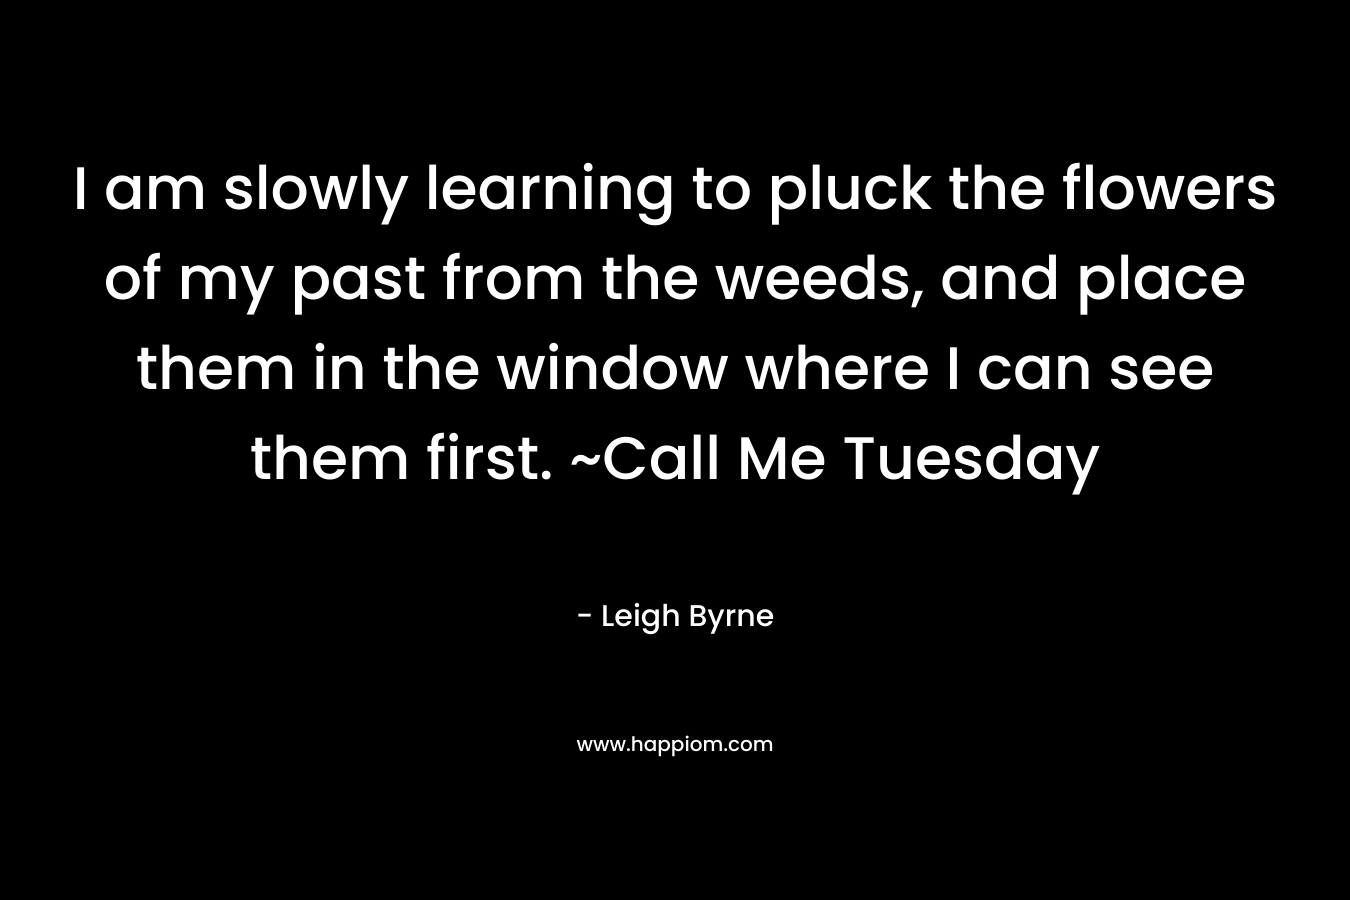 I am slowly learning to pluck the flowers of my past from the weeds, and place them in the window where I can see them first. ~Call Me Tuesday